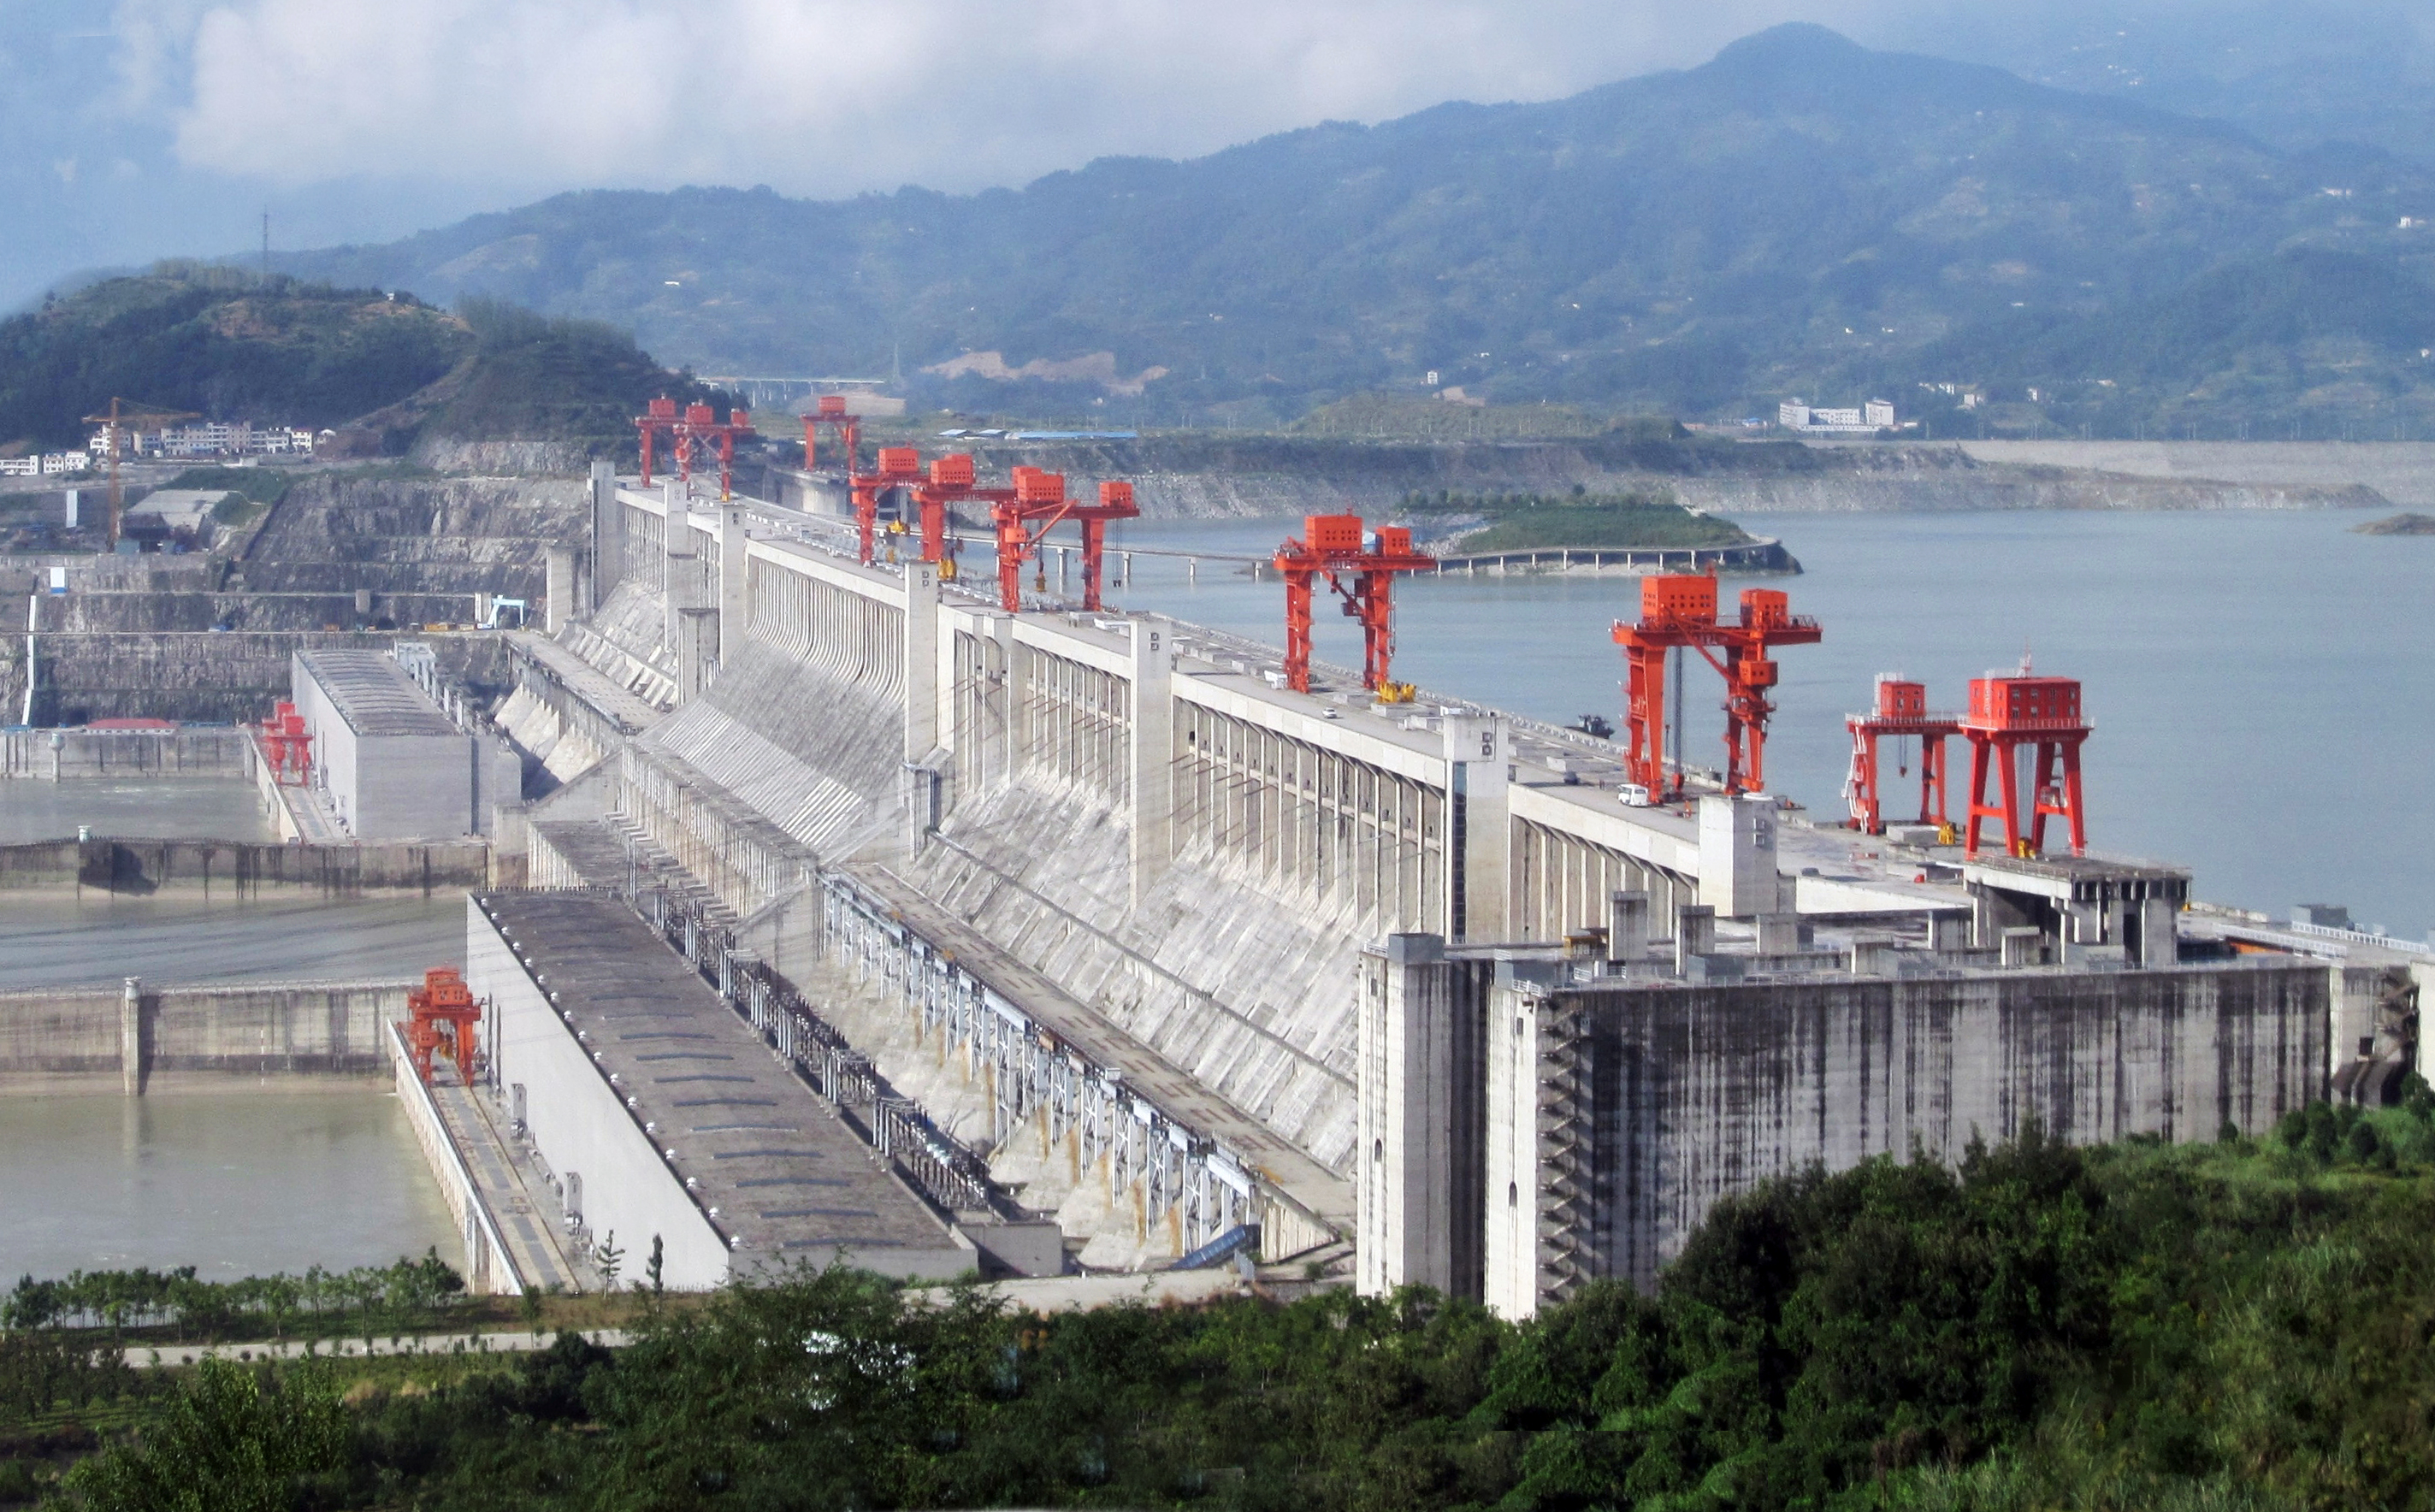 AfDB signs agreement to develop 1,500 MW Mphanda Nkuwa Hydro Power Project in Mozambique